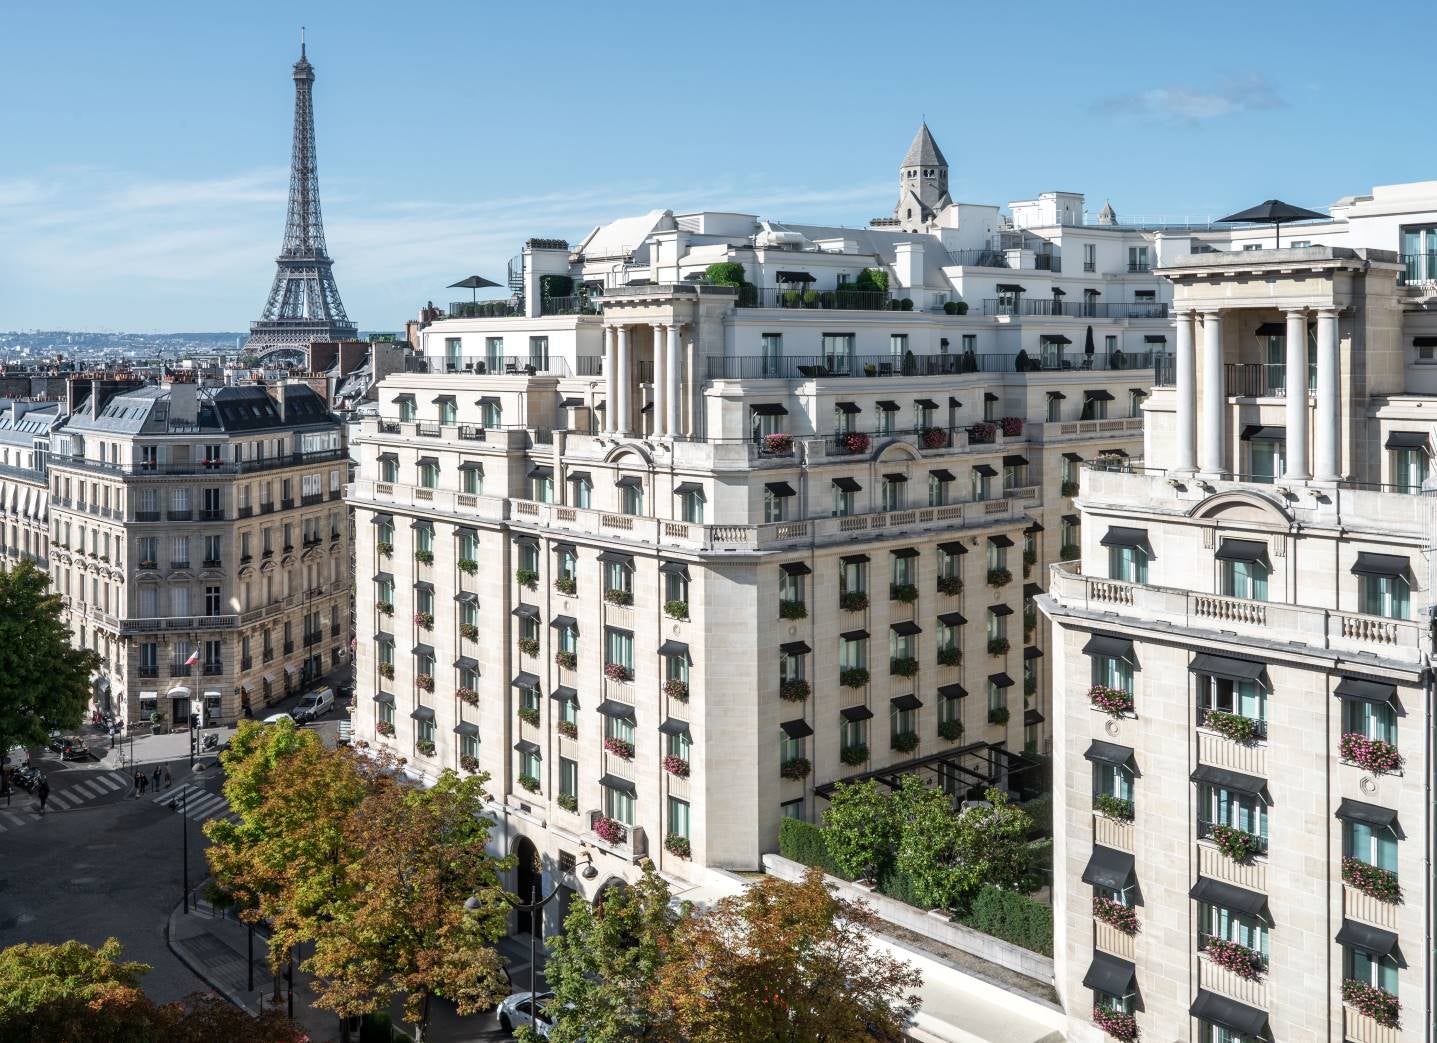 Best hotel in Paris. Image showing the luxurious Four Seasons Hotel George V facade with the Eiffel Tower in the background in Paris